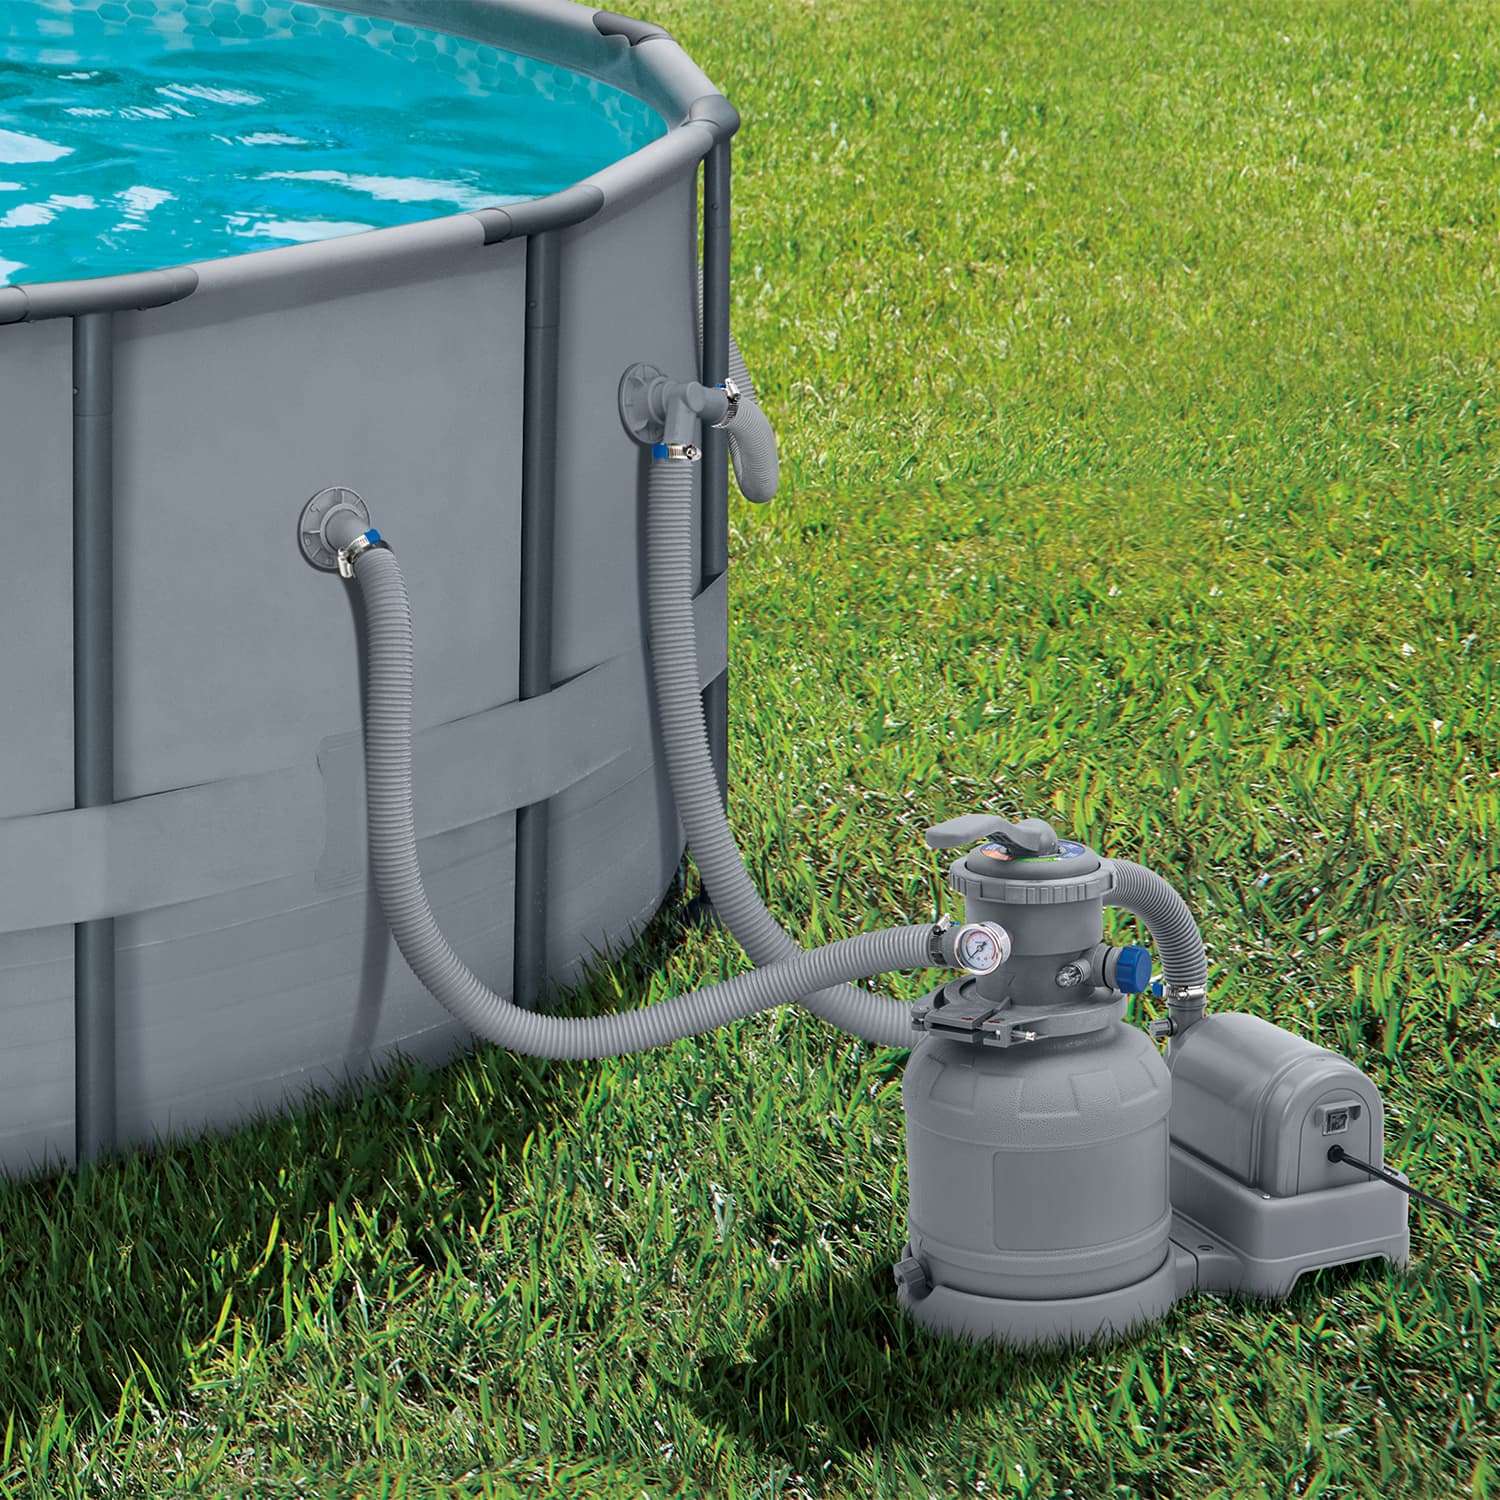 Funsicle 12" Sand Filter Pump attached to Funsicle Oasis Pool on a grass background